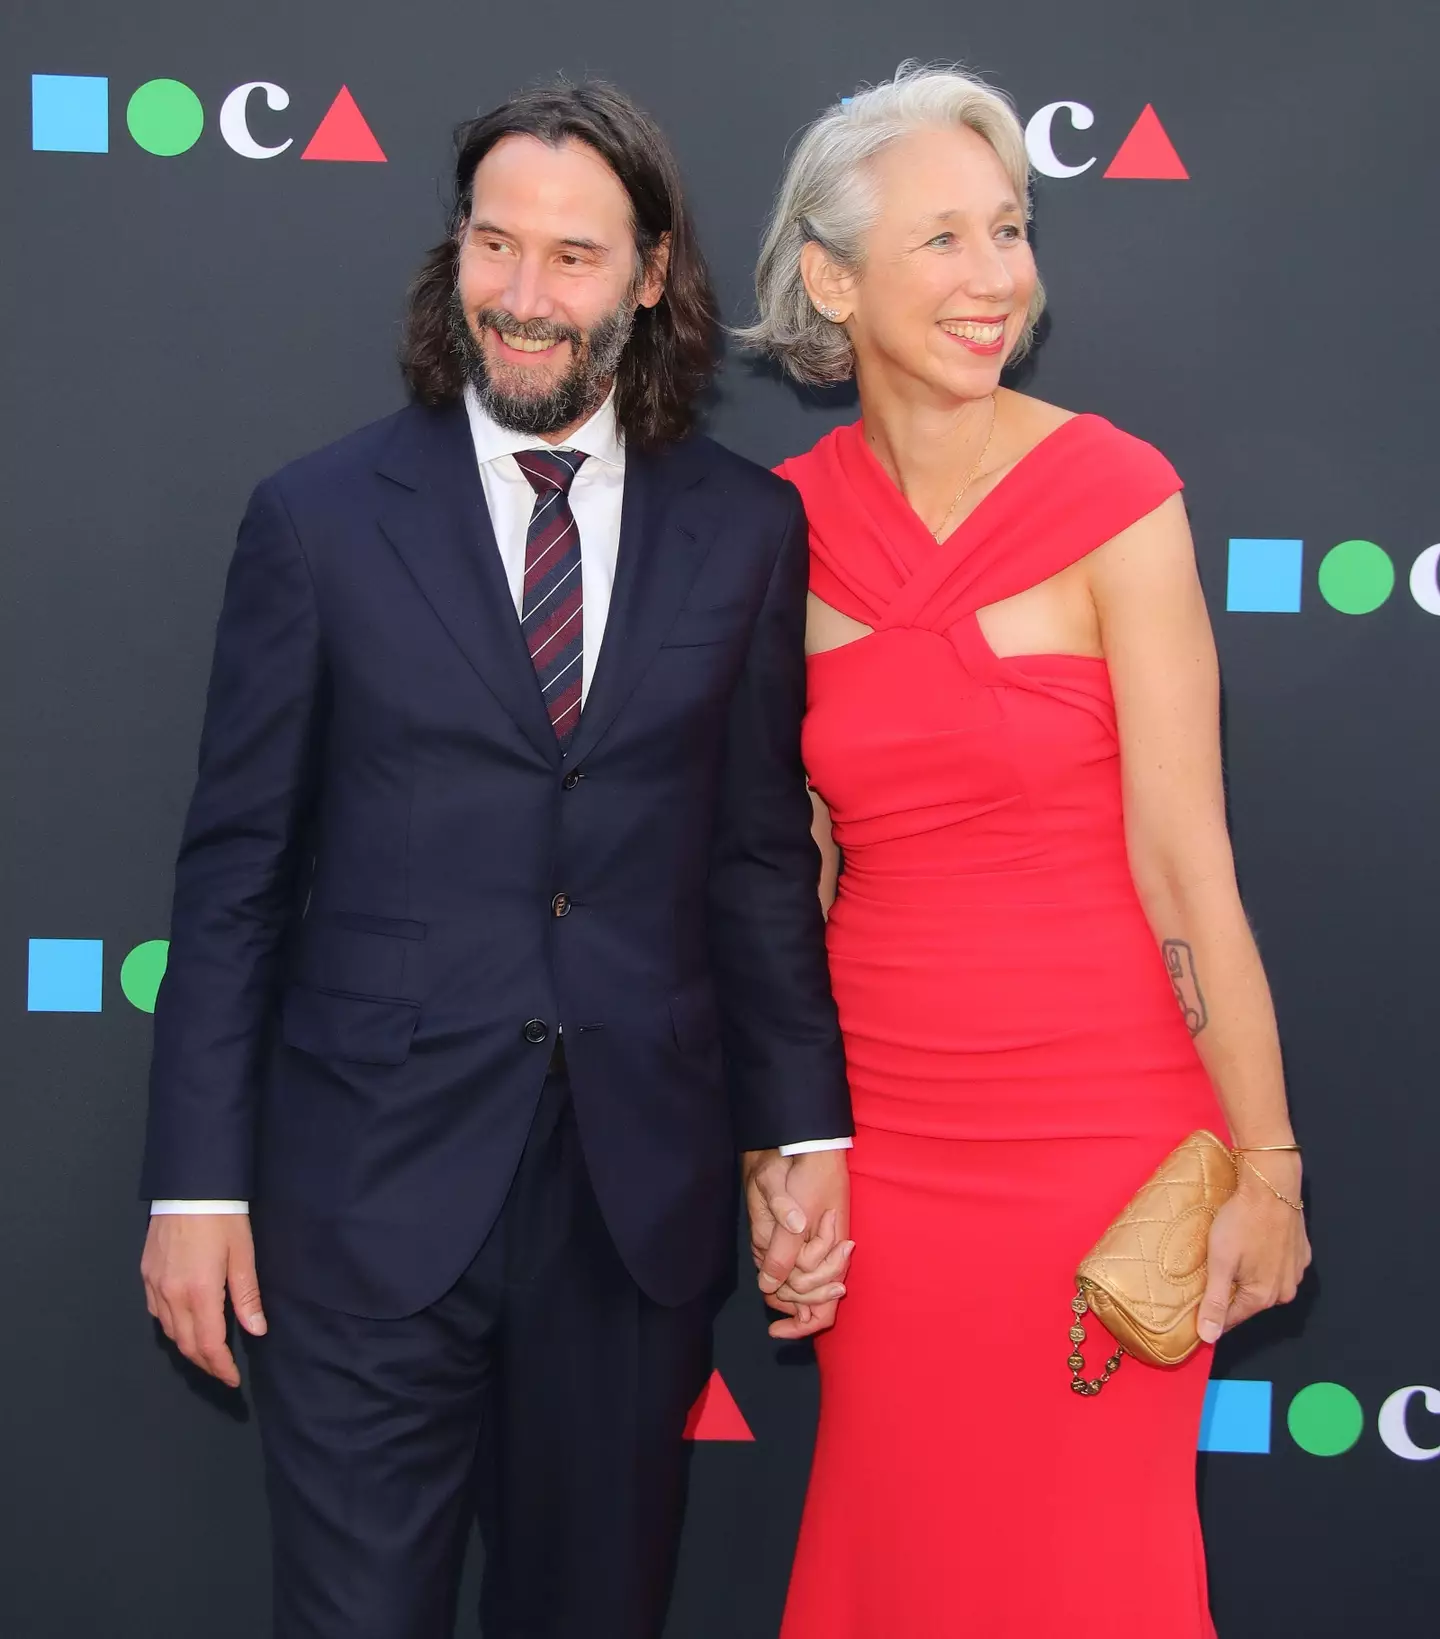 The couple made their official public debut in 2019.